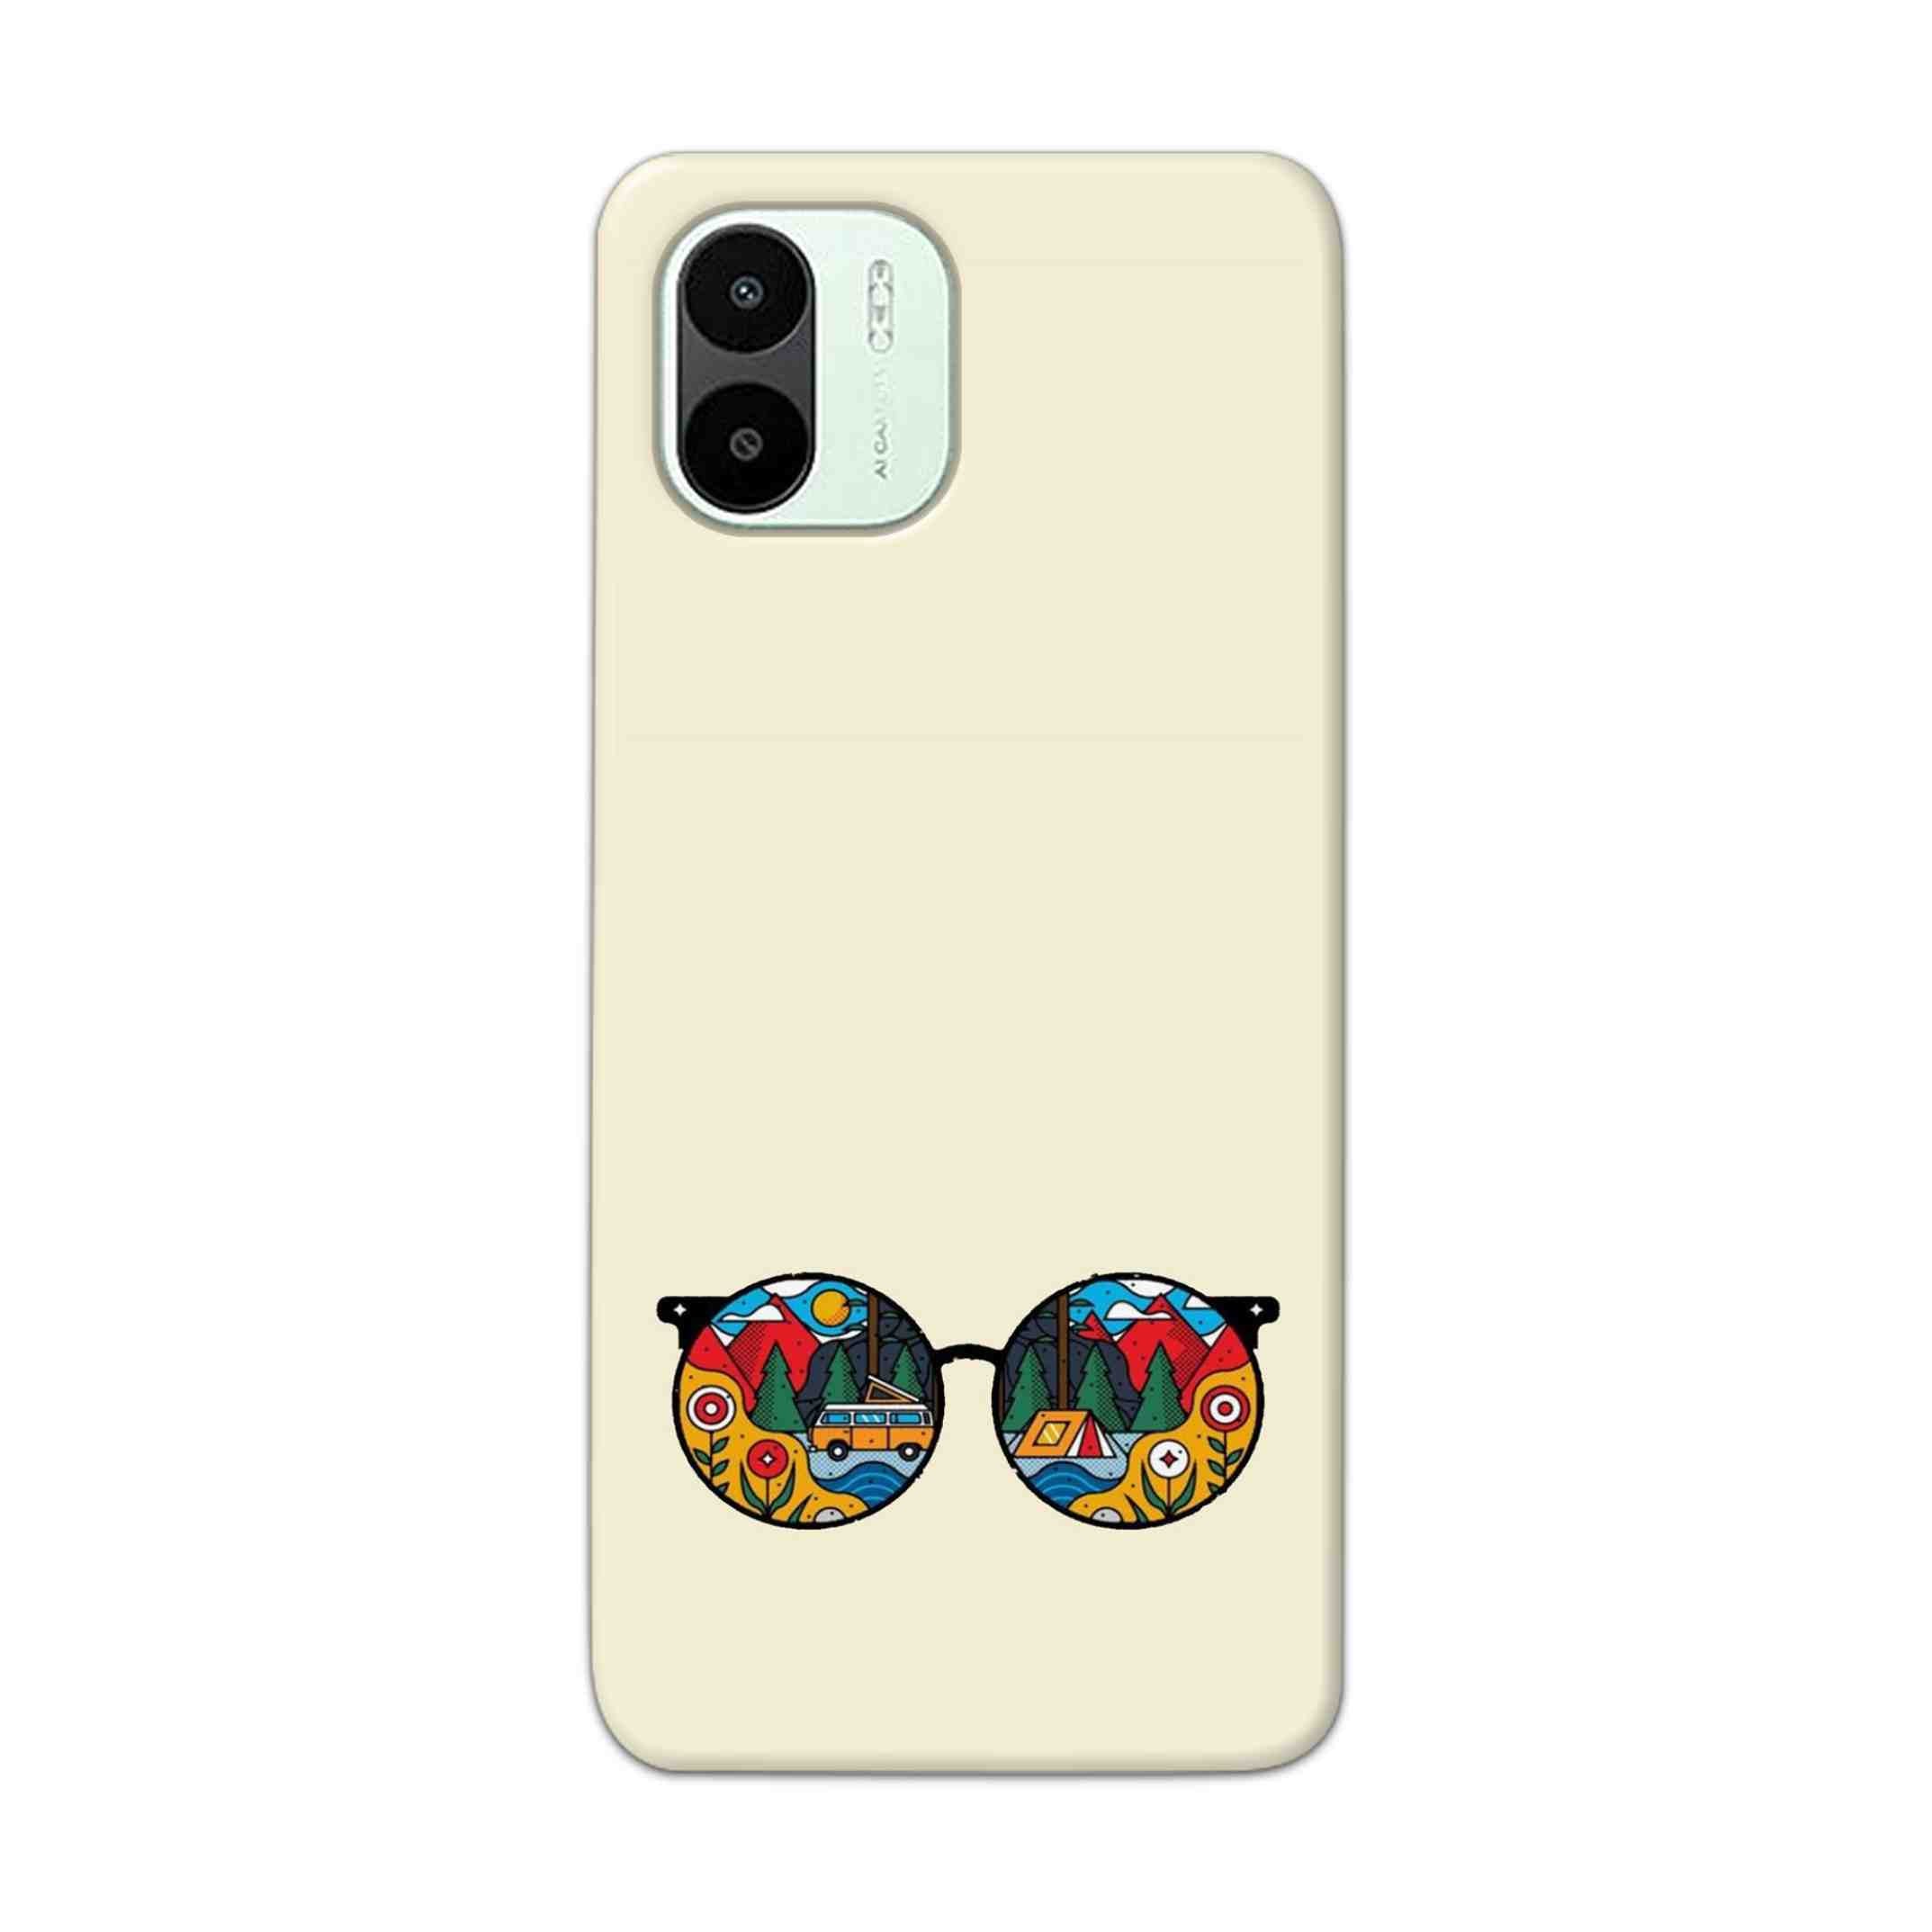 Buy Rainbow Sunglasses Hard Back Mobile Phone Case Cover For Xiaomi Redmi A1 5G Online